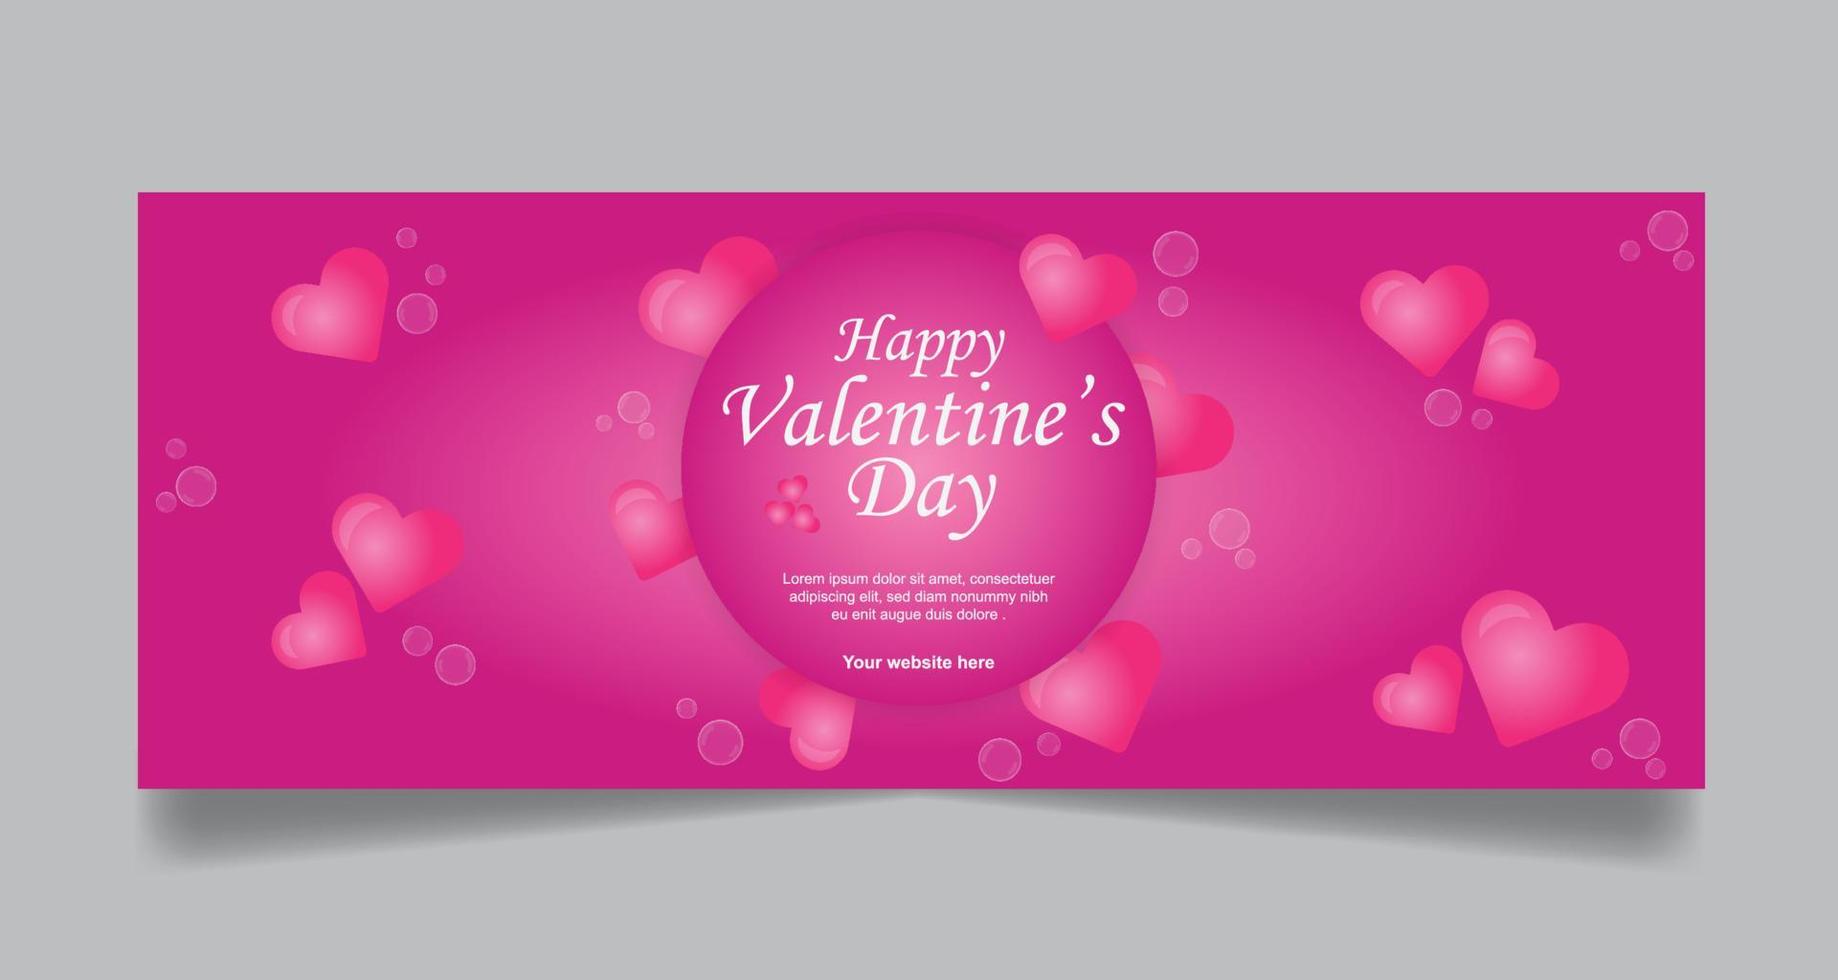 Valentine's day social media post and cover banner design vector